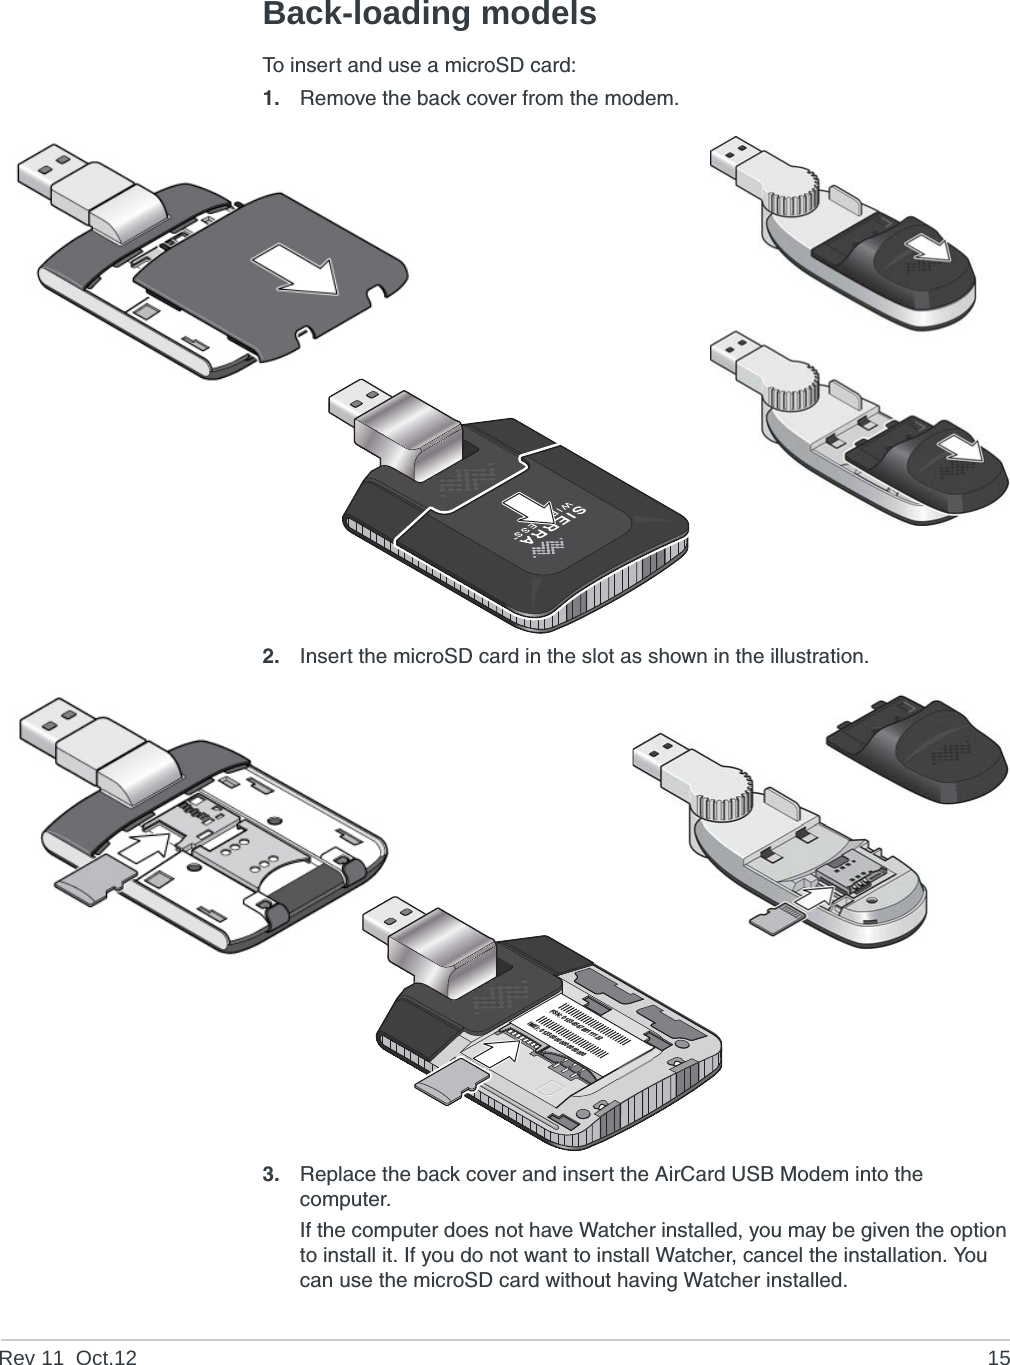 Rev 11  Oct.12 15Back-loading modelsTo insert and use a microSD card:1. Remove the back cover from the modem.2. Insert the microSD card in the slot as shown in the illustration.3. Replace the back cover and insert the AirCard USB Modem into the computer.If the computer does not have Watcher installed, you may be given the option to install it. If you do not want to install Watcher, cancel the installation. You can use the microSD card without having Watcher installed.FSN: 0123456789111122IMEI: 012300000000000000